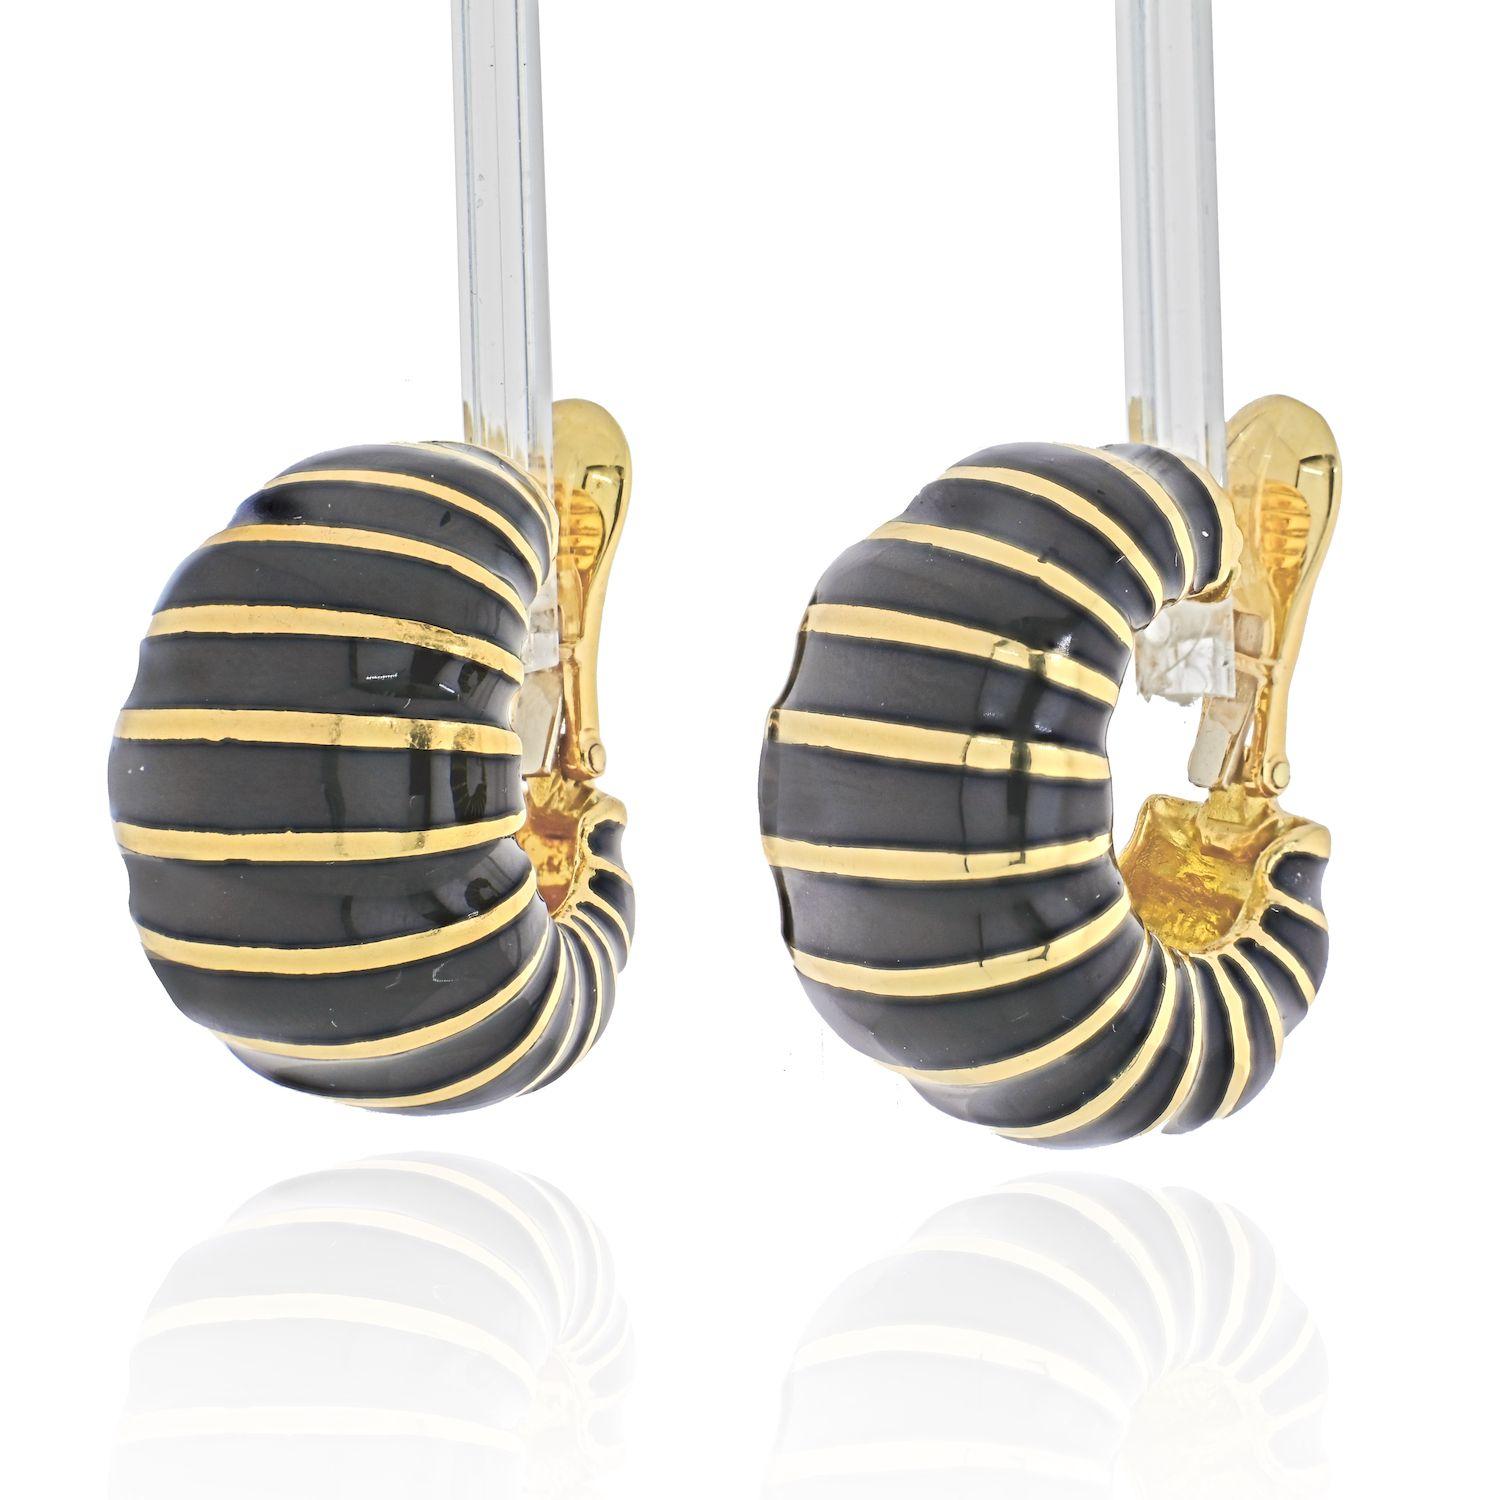 Designed as large bombe shrimp gold earrings applied with black enamel and accented by horizontal gold stripes. 
30mm long.
Clip-on closure. 
